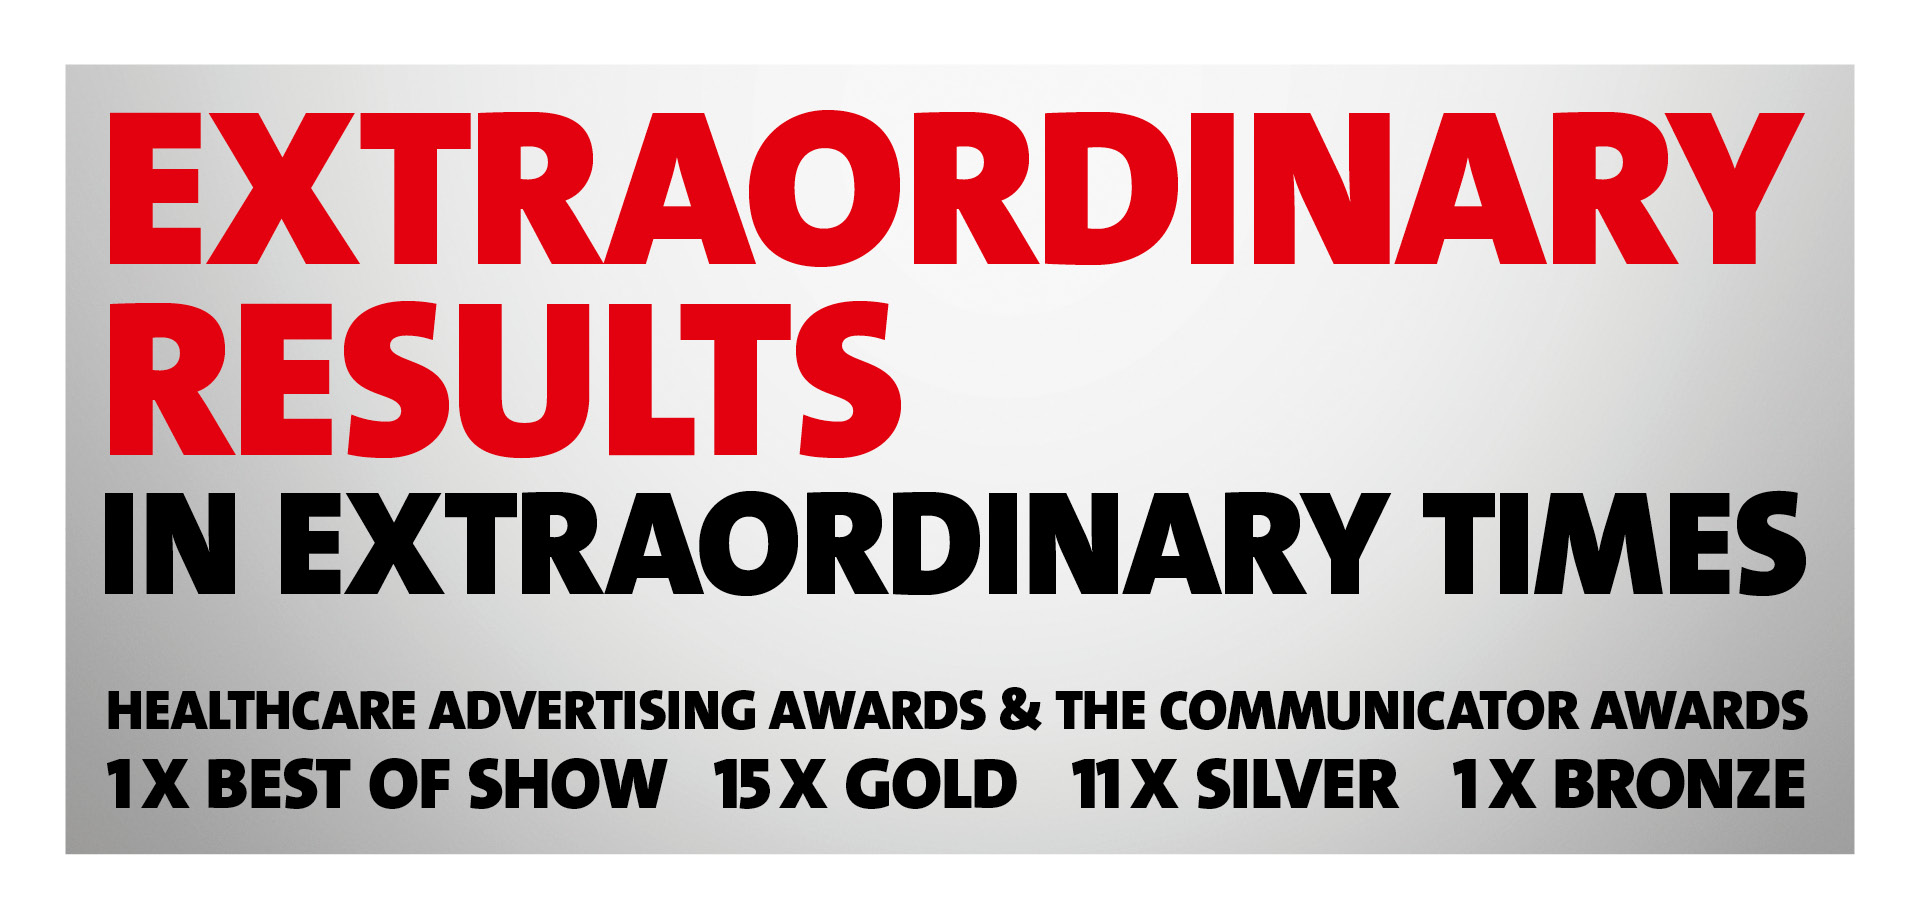 extraordinary-results-in-extraordinary-times